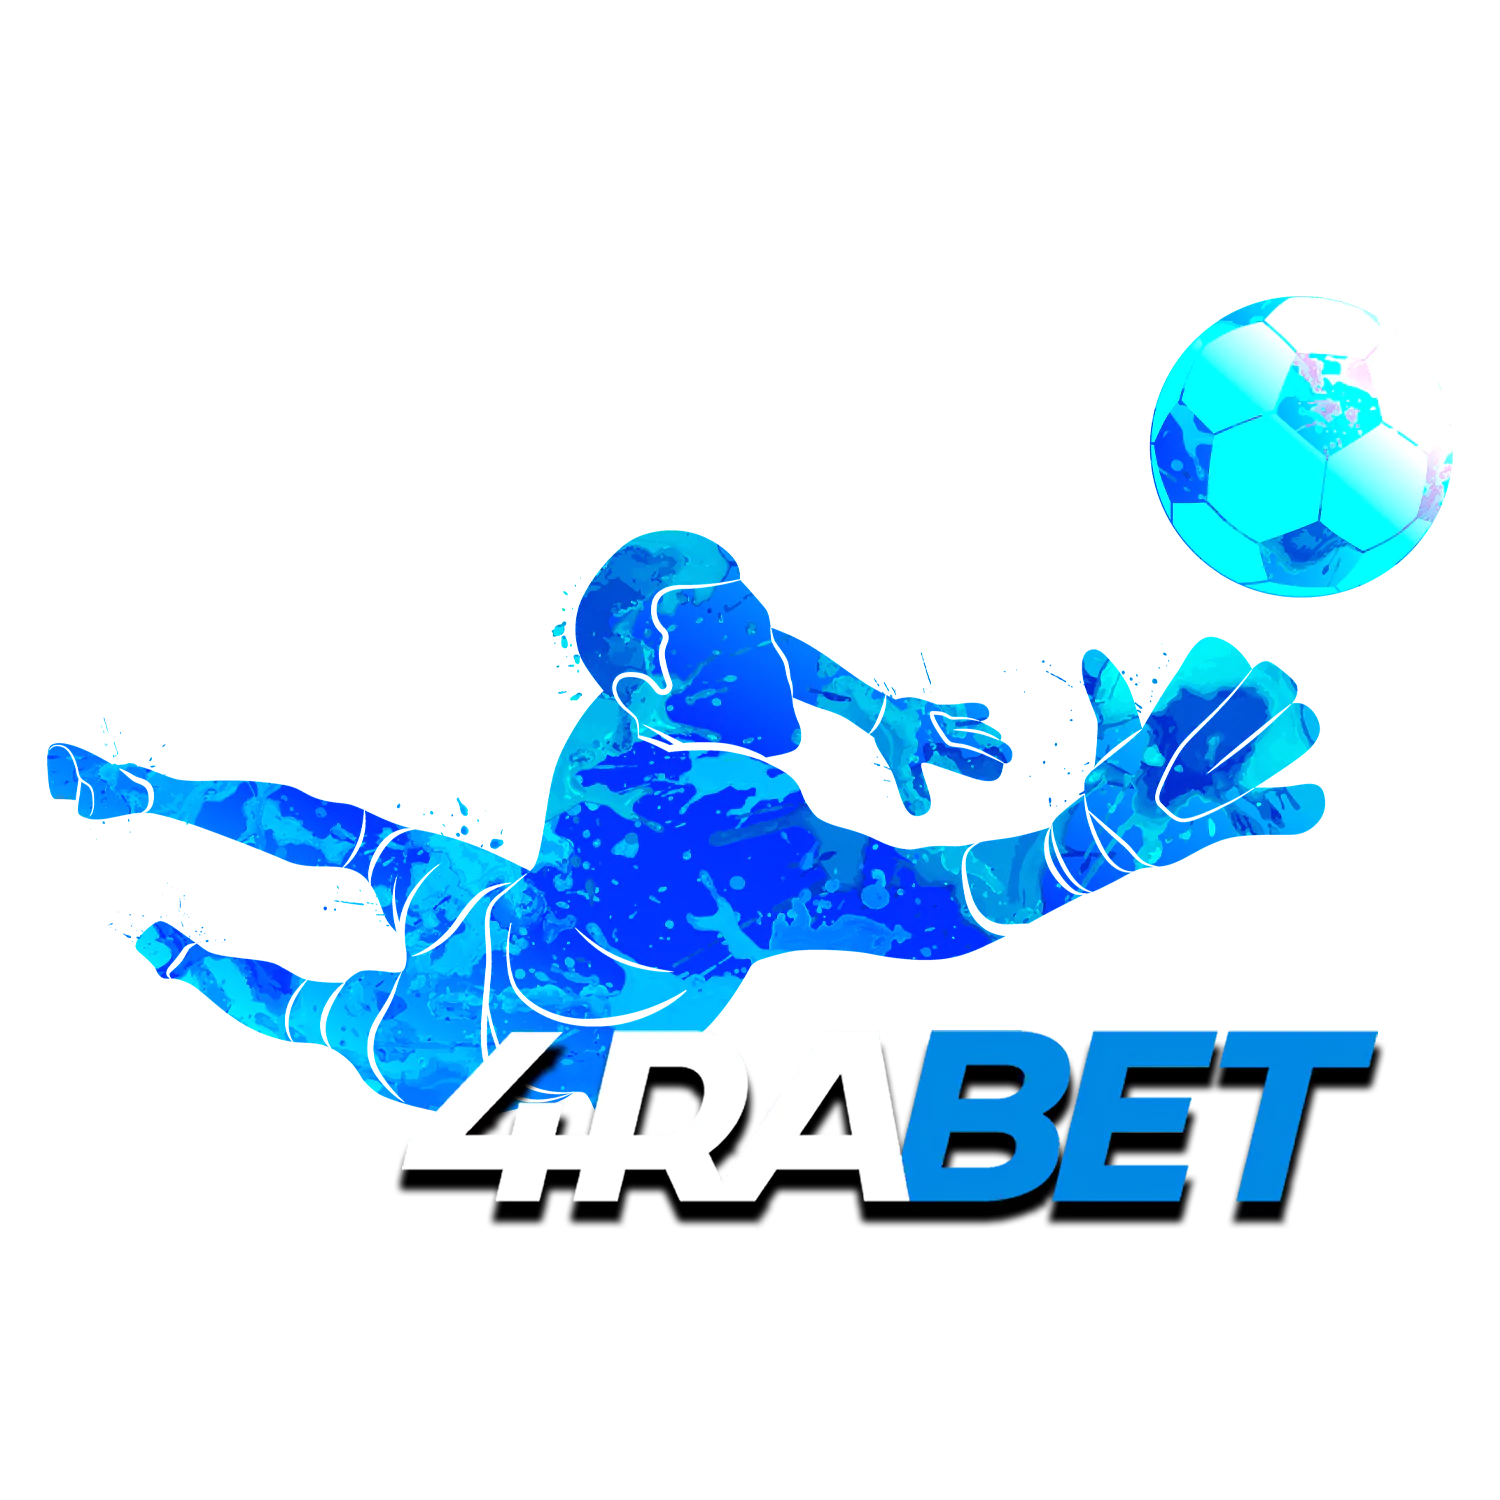 Learn about the features of betting on football on the 4rabet site and in the app.